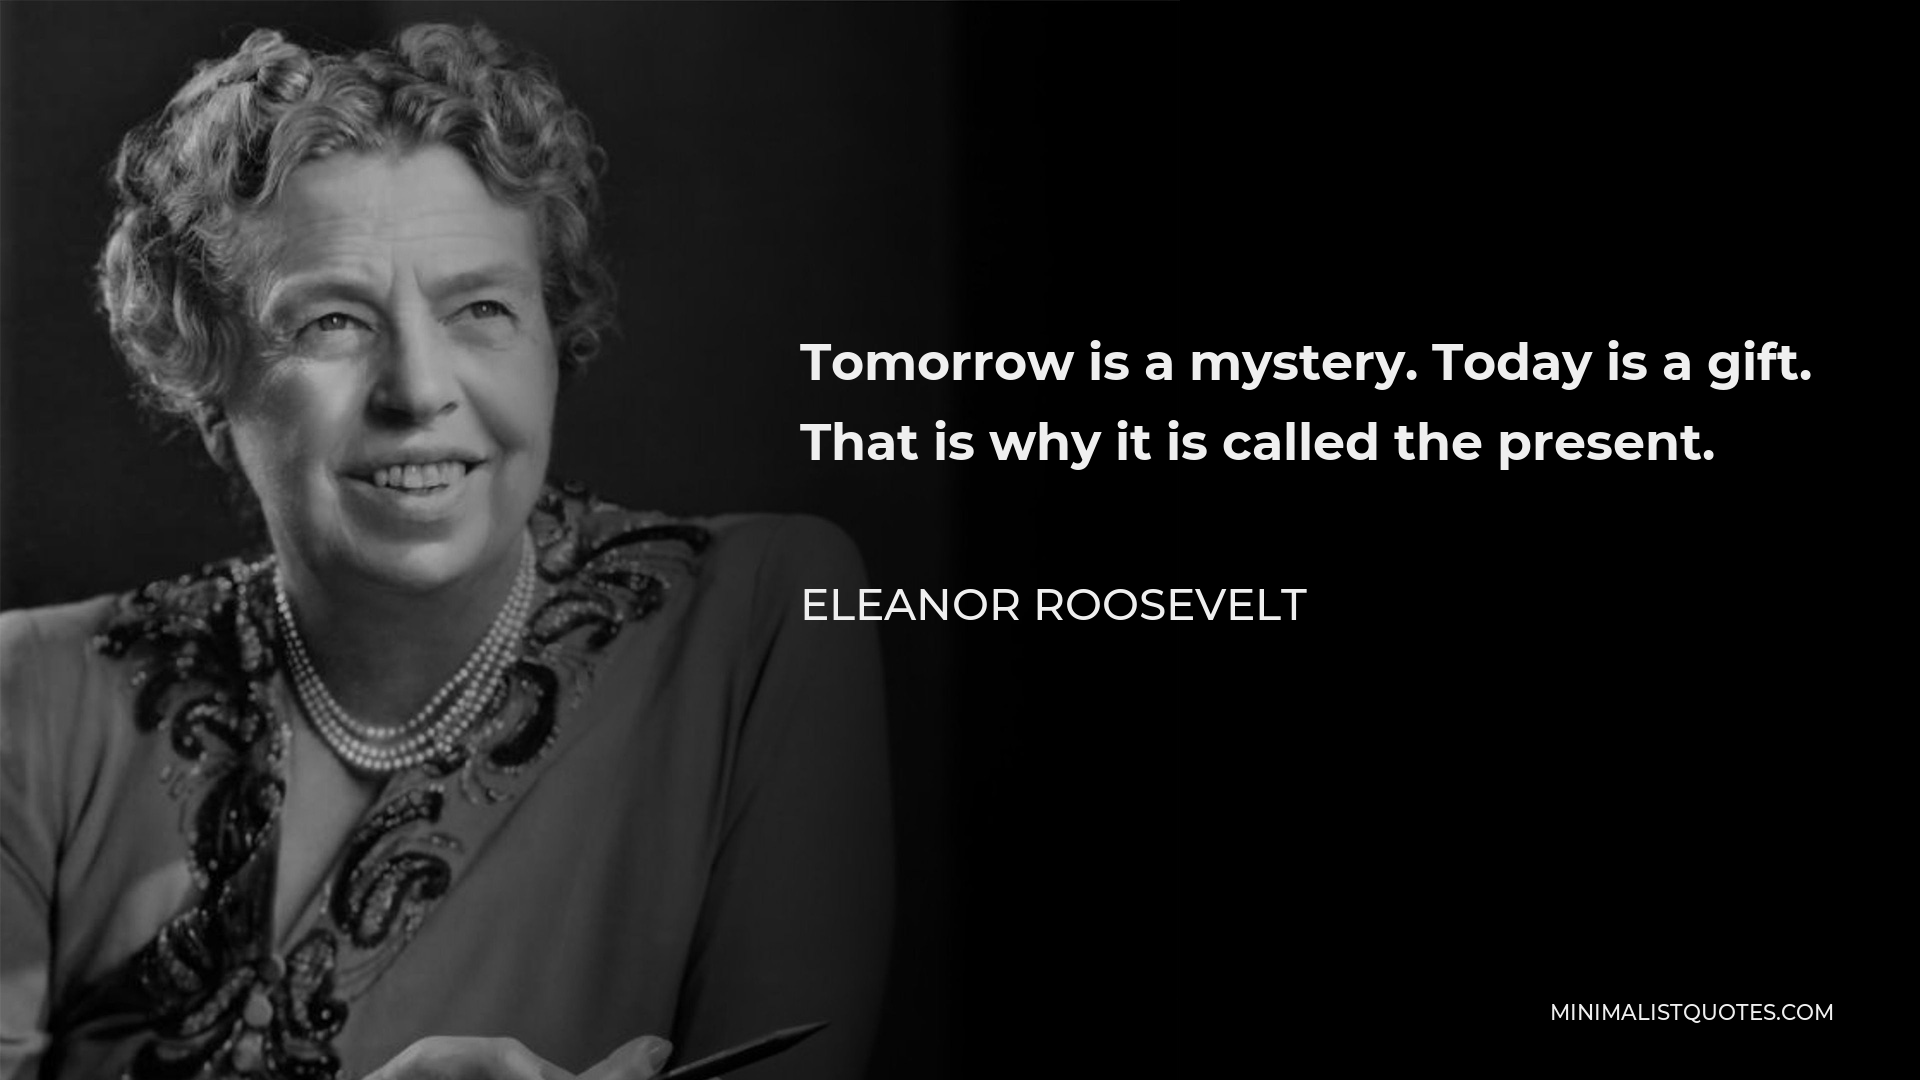 Eleanor Roosevelt Quote - Tomorrow is a mystery. Today is a gift. That is why it is called the present.